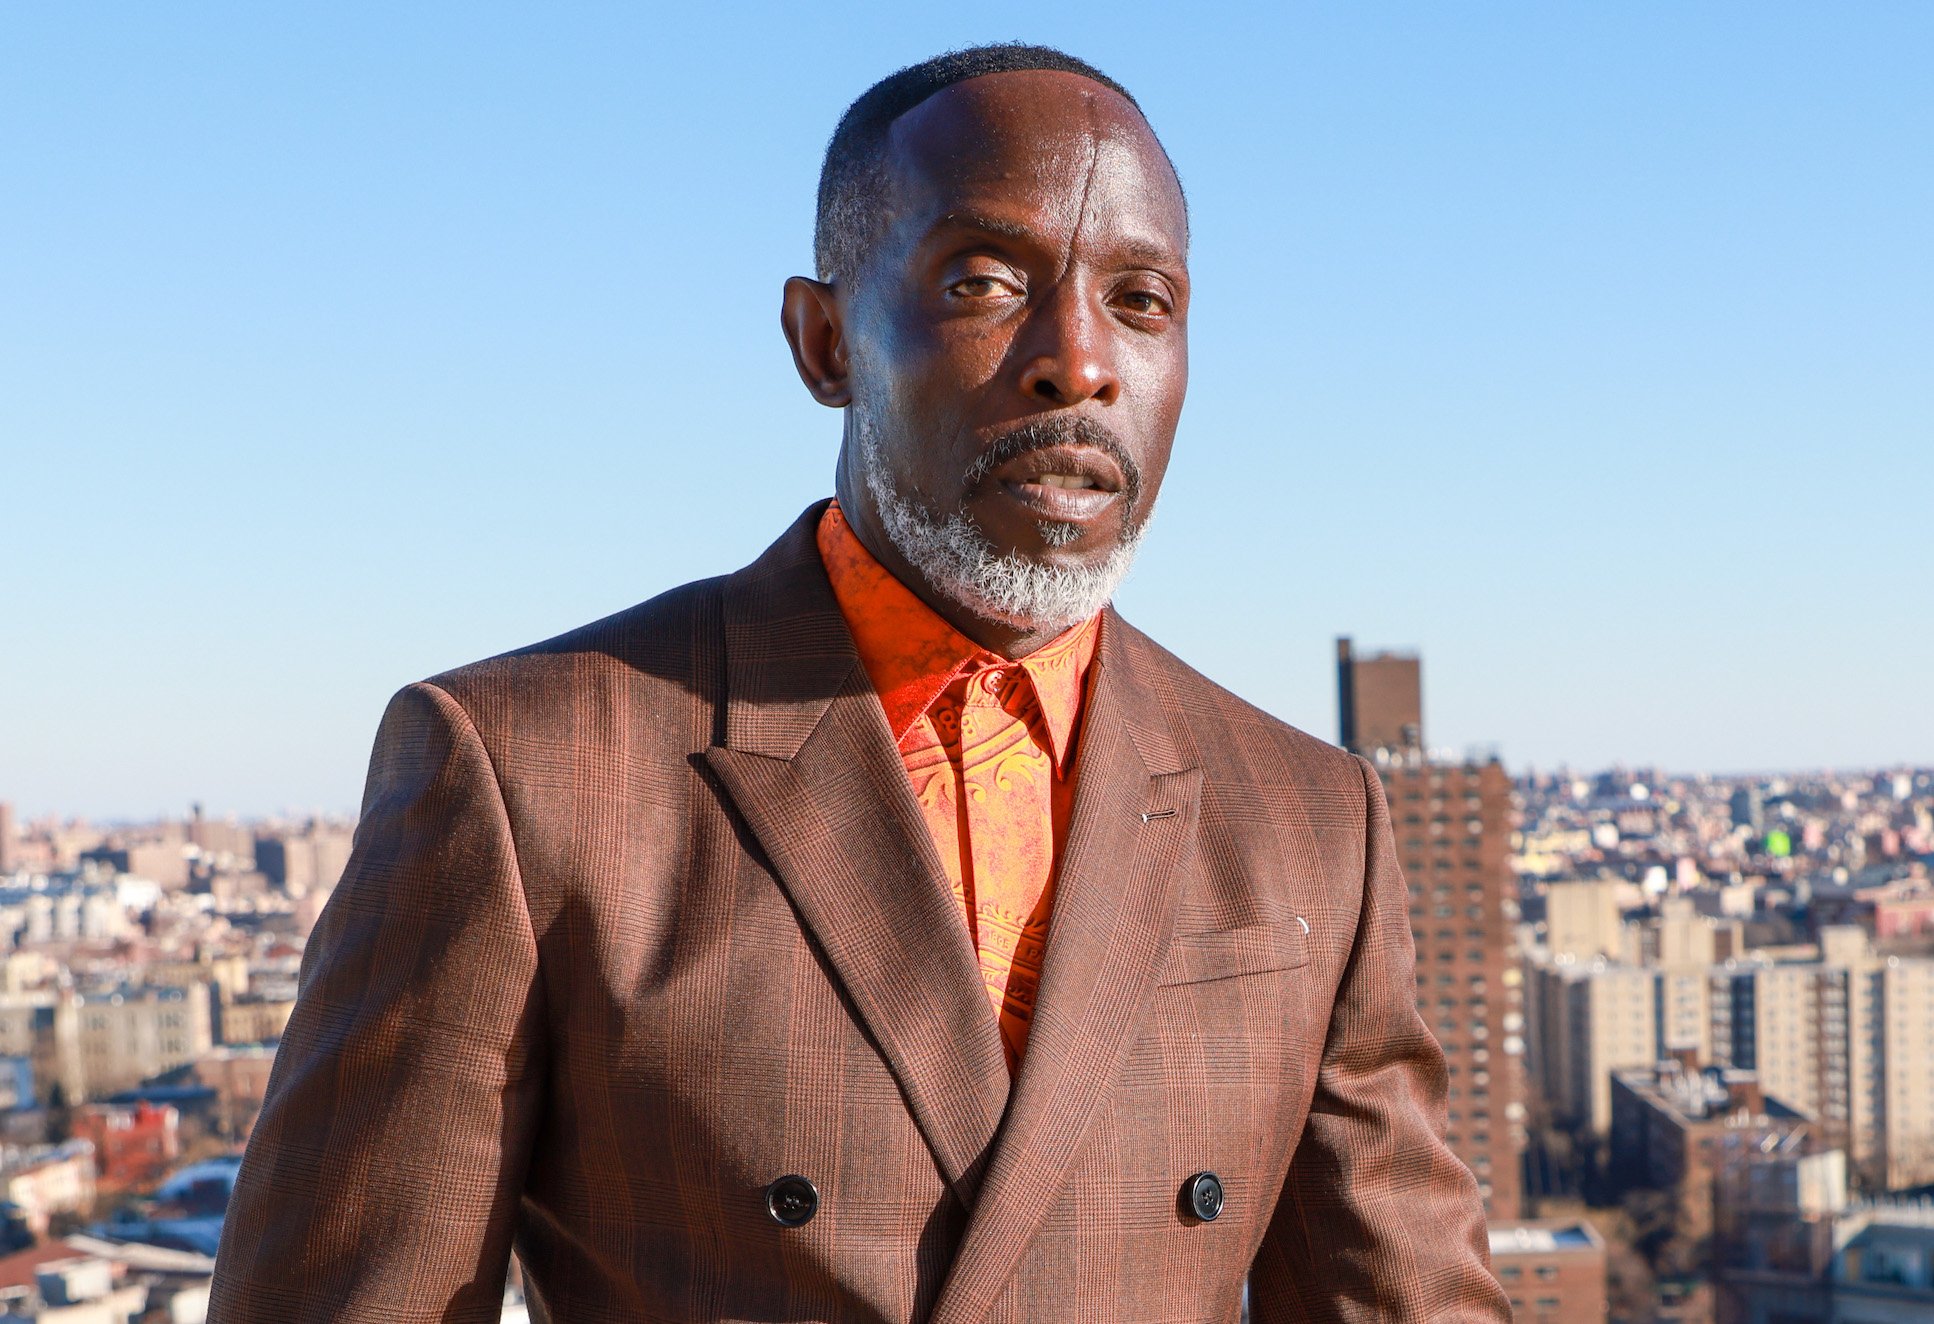 'Lovecraft Country' star Michael K. Williams in a suit against a city backdrop. Michael K. Williams earned his net worth from 'The Wire' and is now nominated for an Emmy thanks to 'Lovecraft Country'